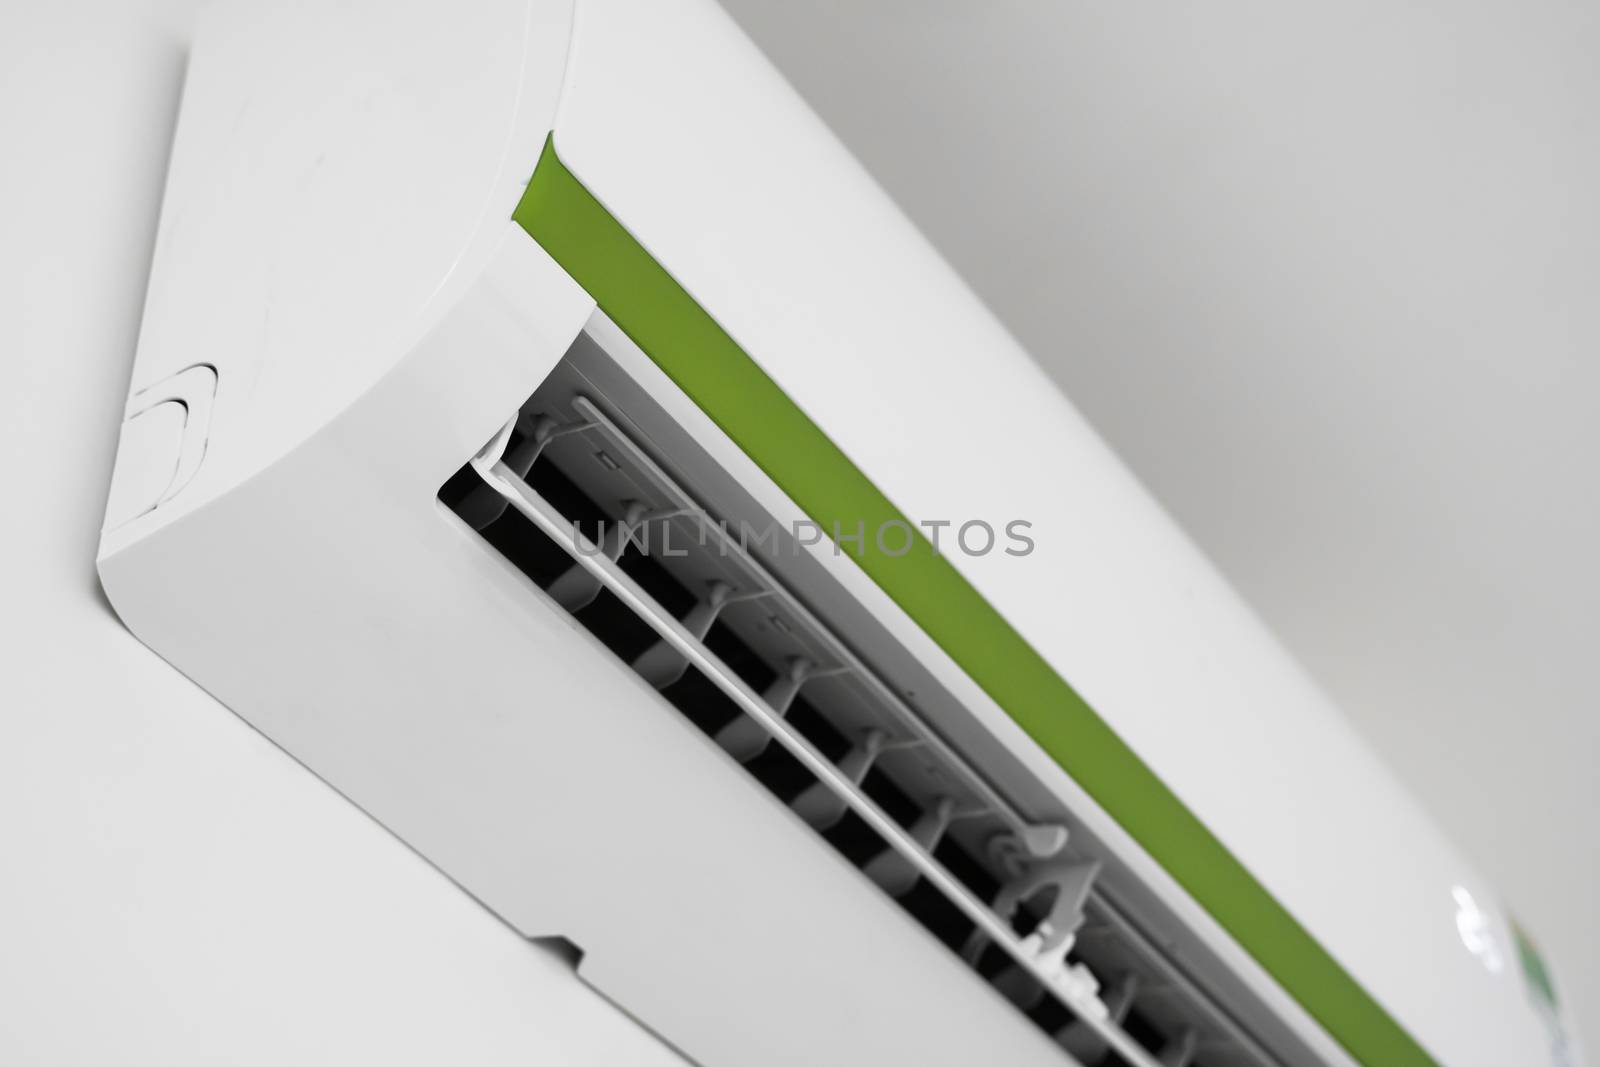 Air conditioner mounted on a white wall in the living room or bedroom. Indooor comfort temperature. Health concepts and energy savings. by vovsht